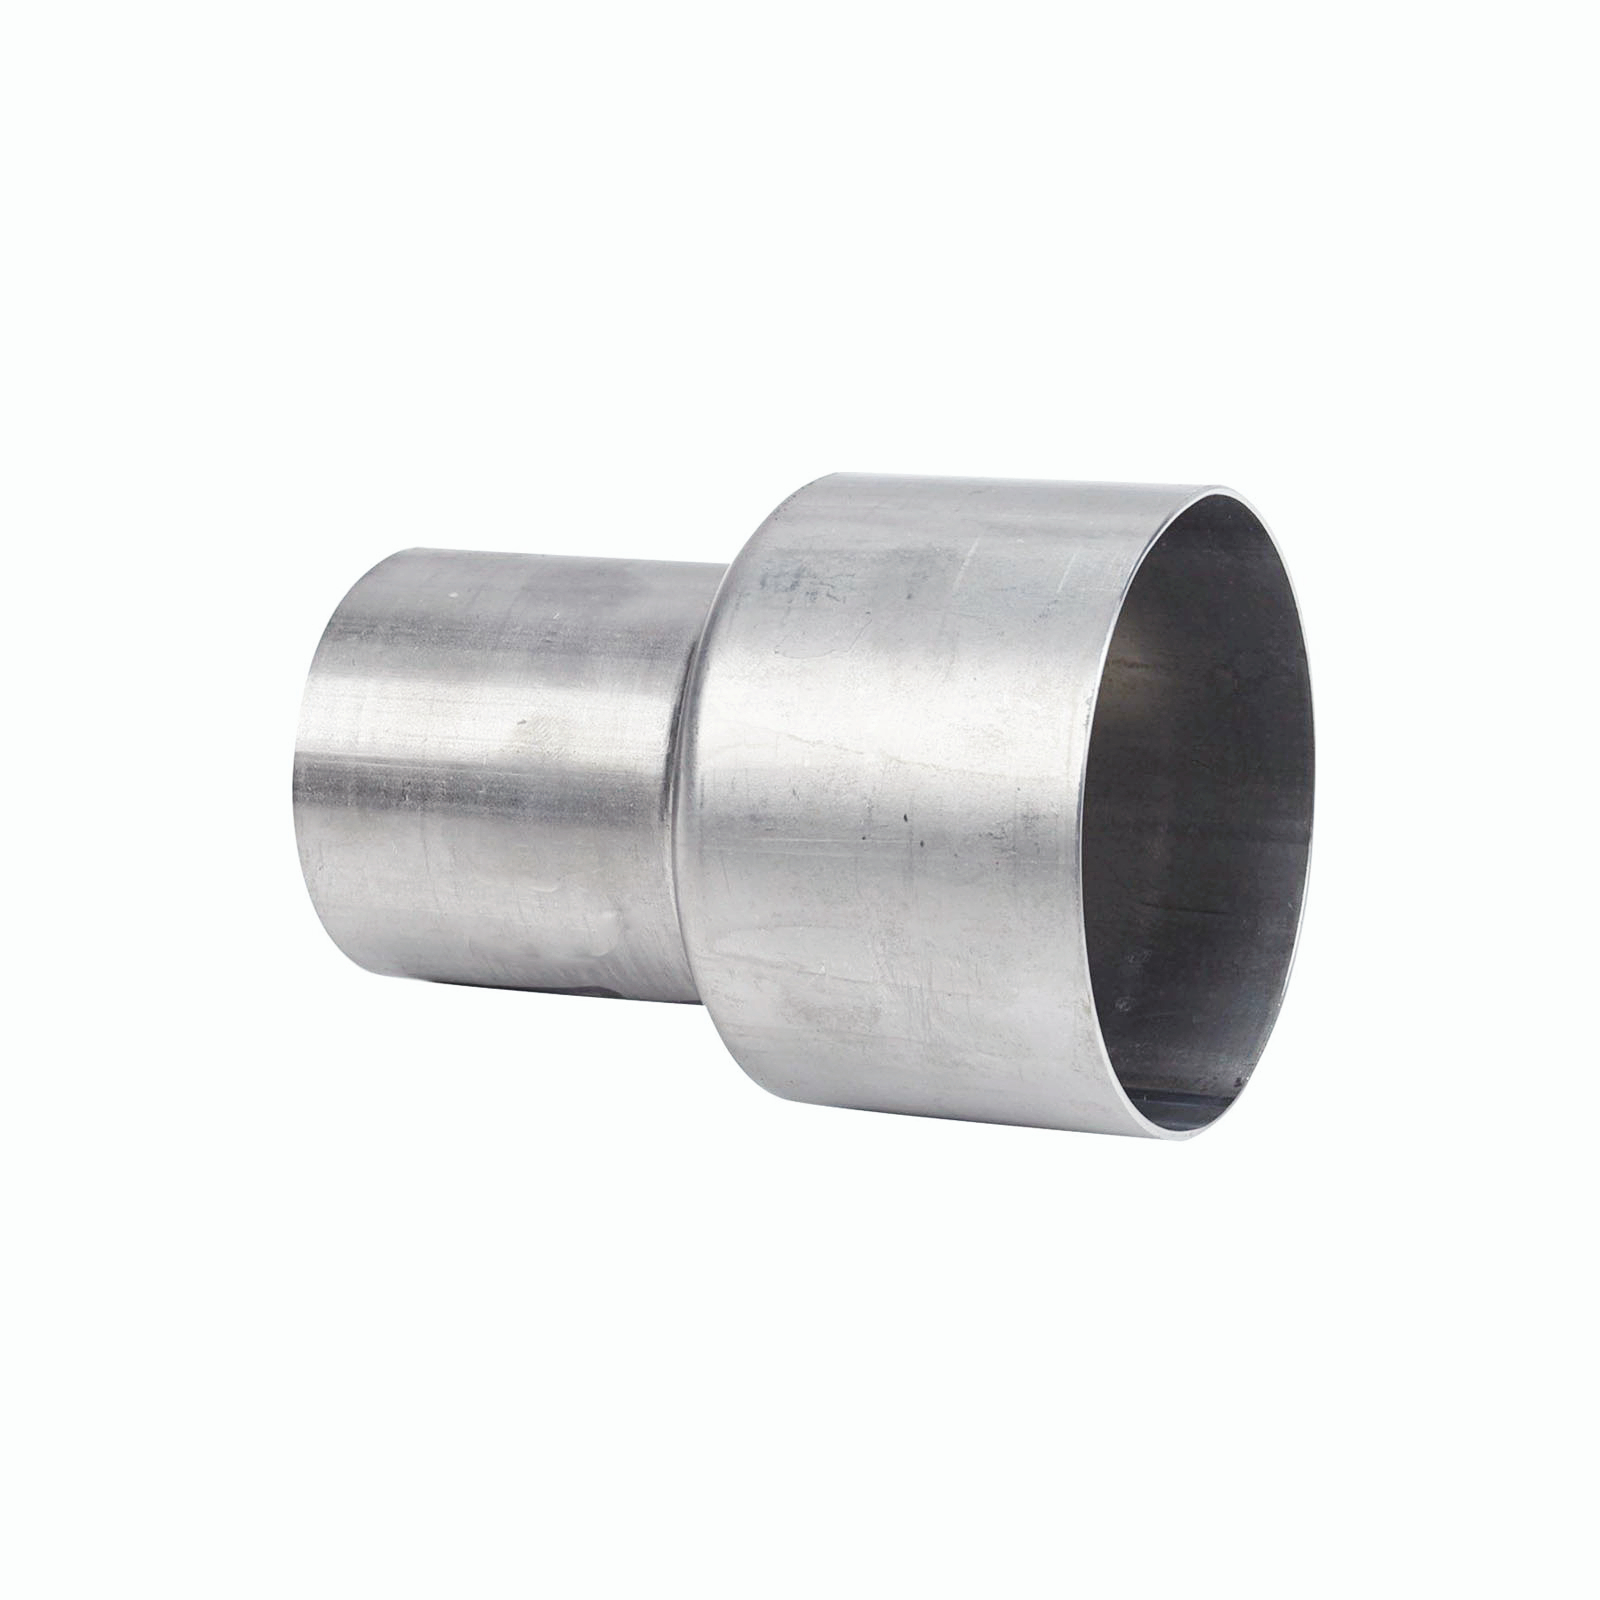 2” ID To 3” OD Exhaust Pipe To Stainless Steel Component Adapter Reducer Connector Universal